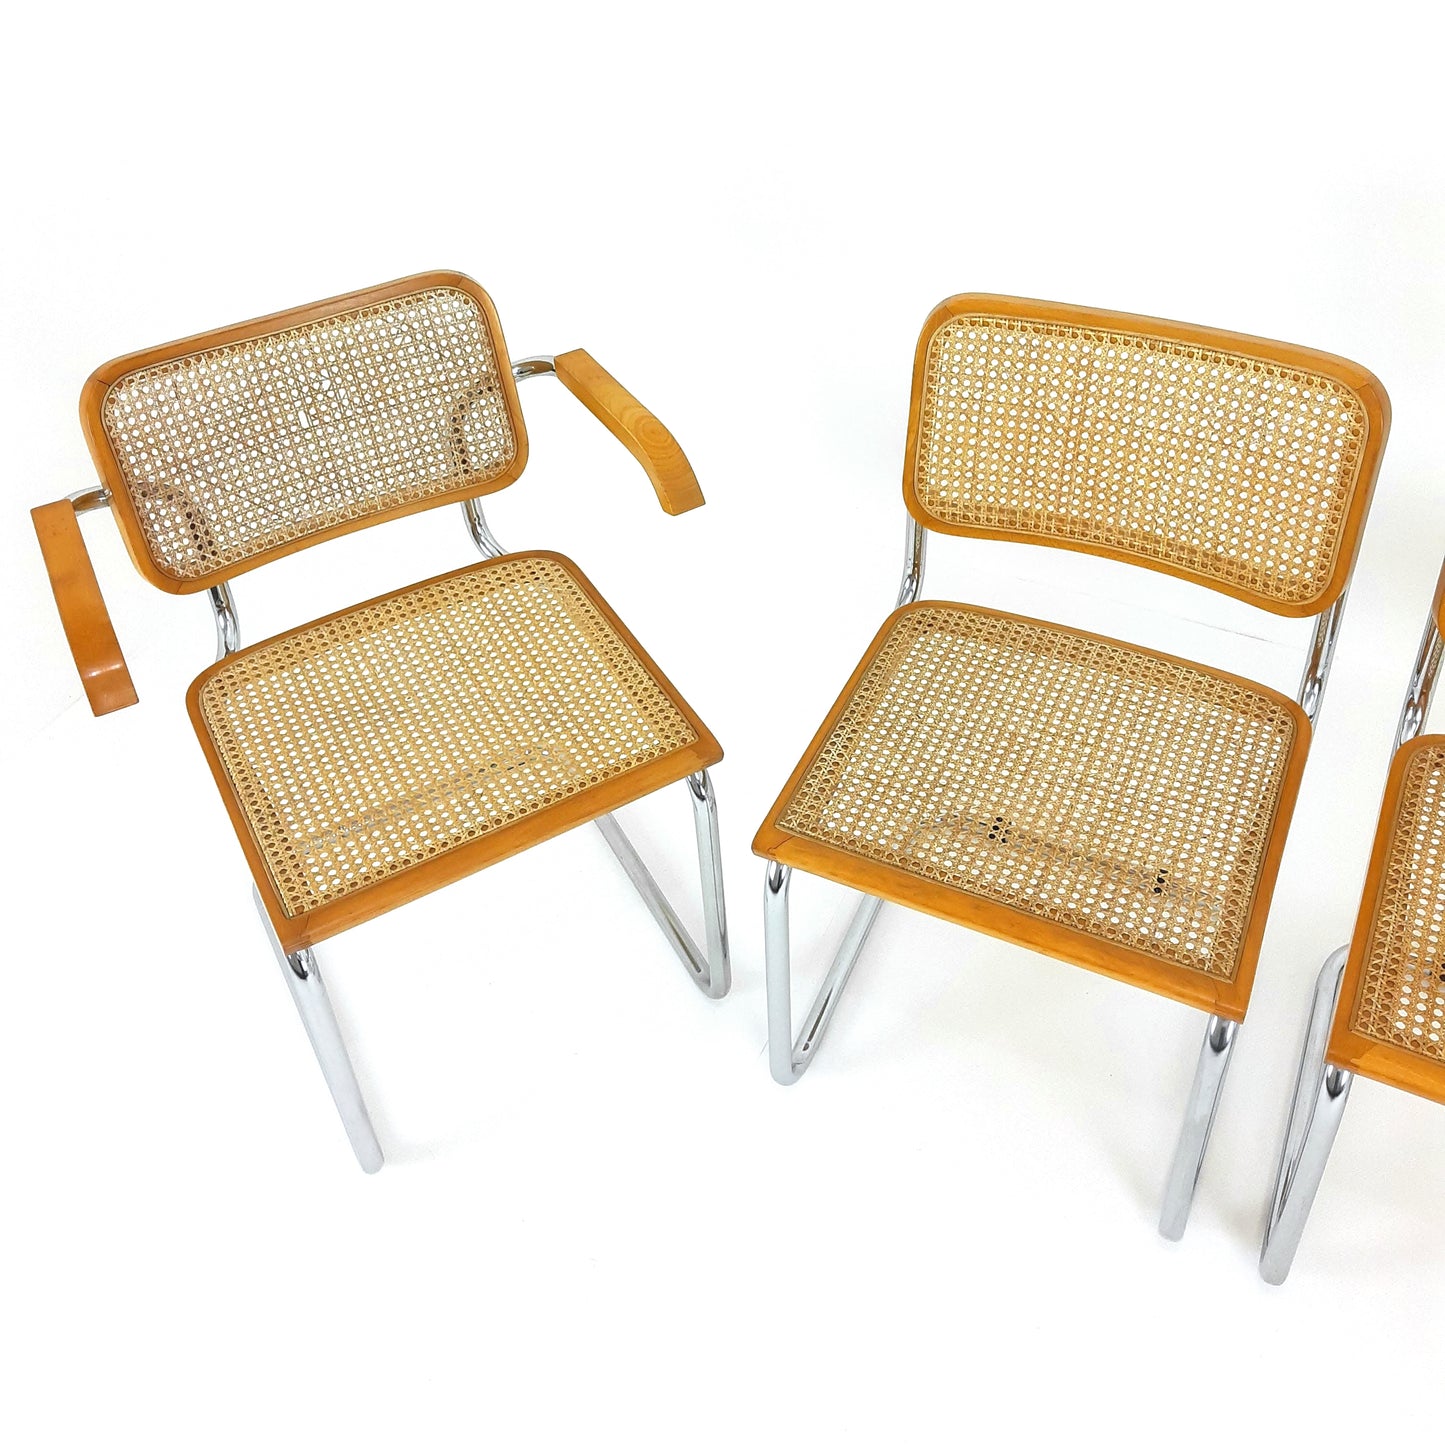 Marcel Breuer Cesca Style Cantilevered Chairs x4 - Rattan and Tubular Steel - Mid Century